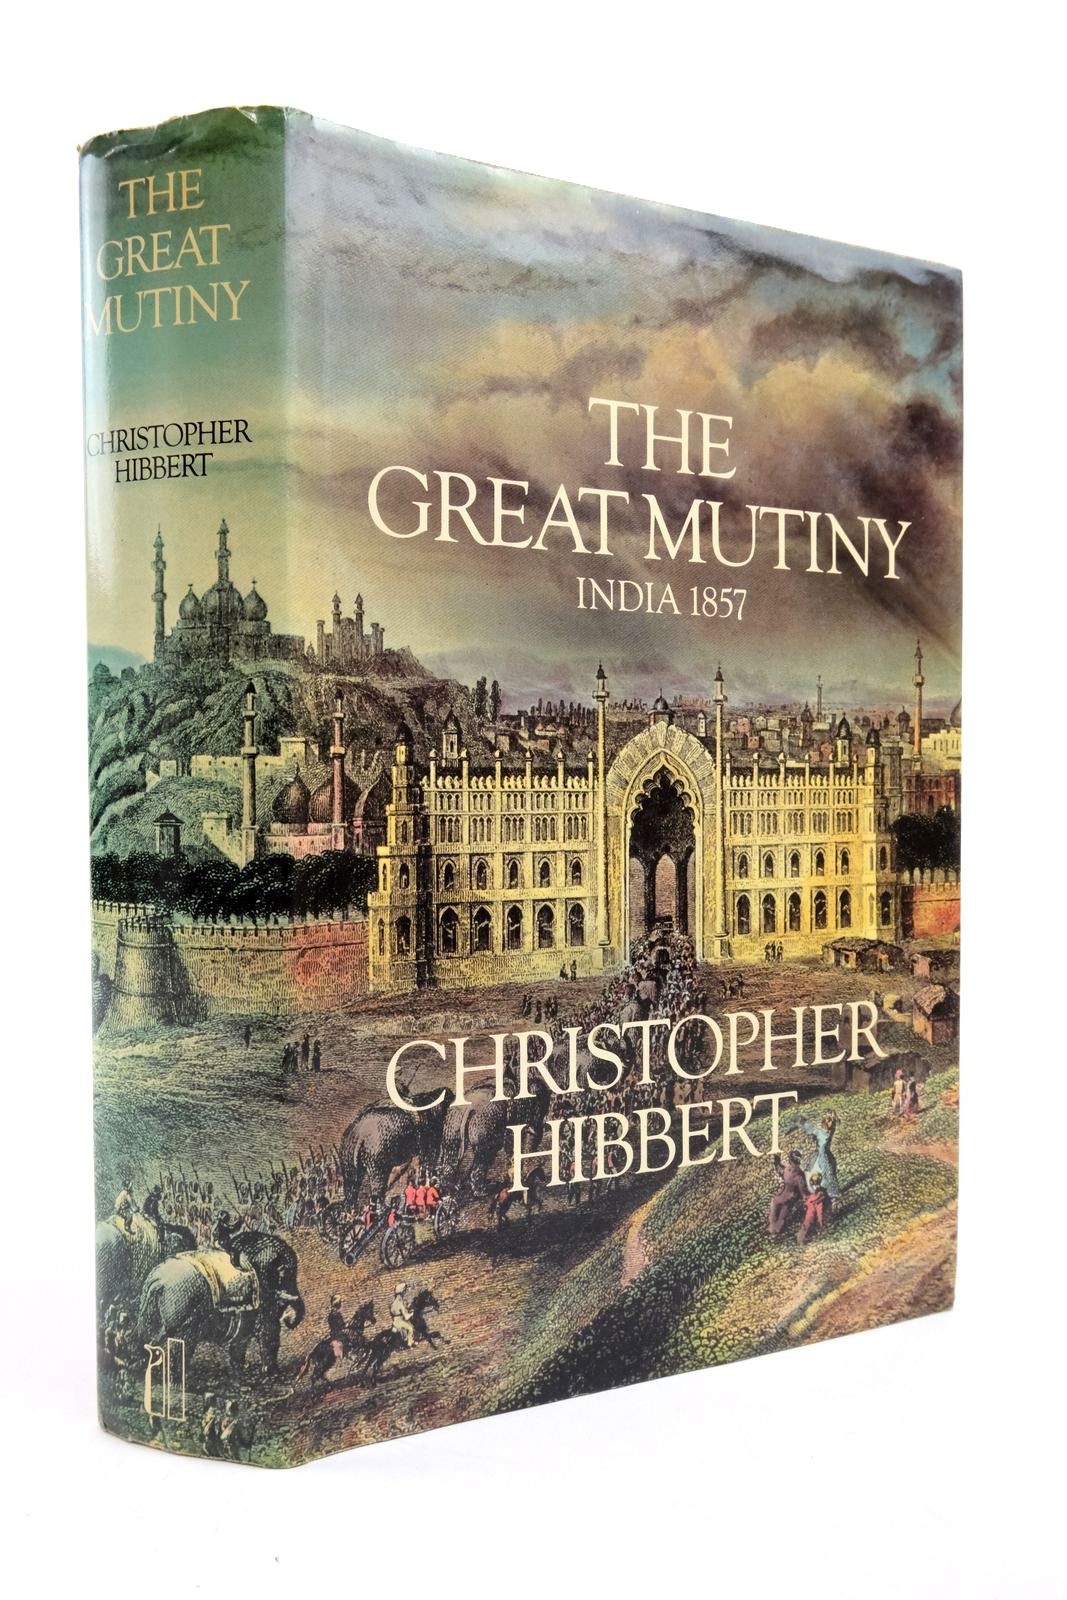 Photo of THE GREAT MUTINY INDIA 1857 written by Hibbert, Christopher published by Allen Lane (STOCK CODE: 2138539)  for sale by Stella & Rose's Books